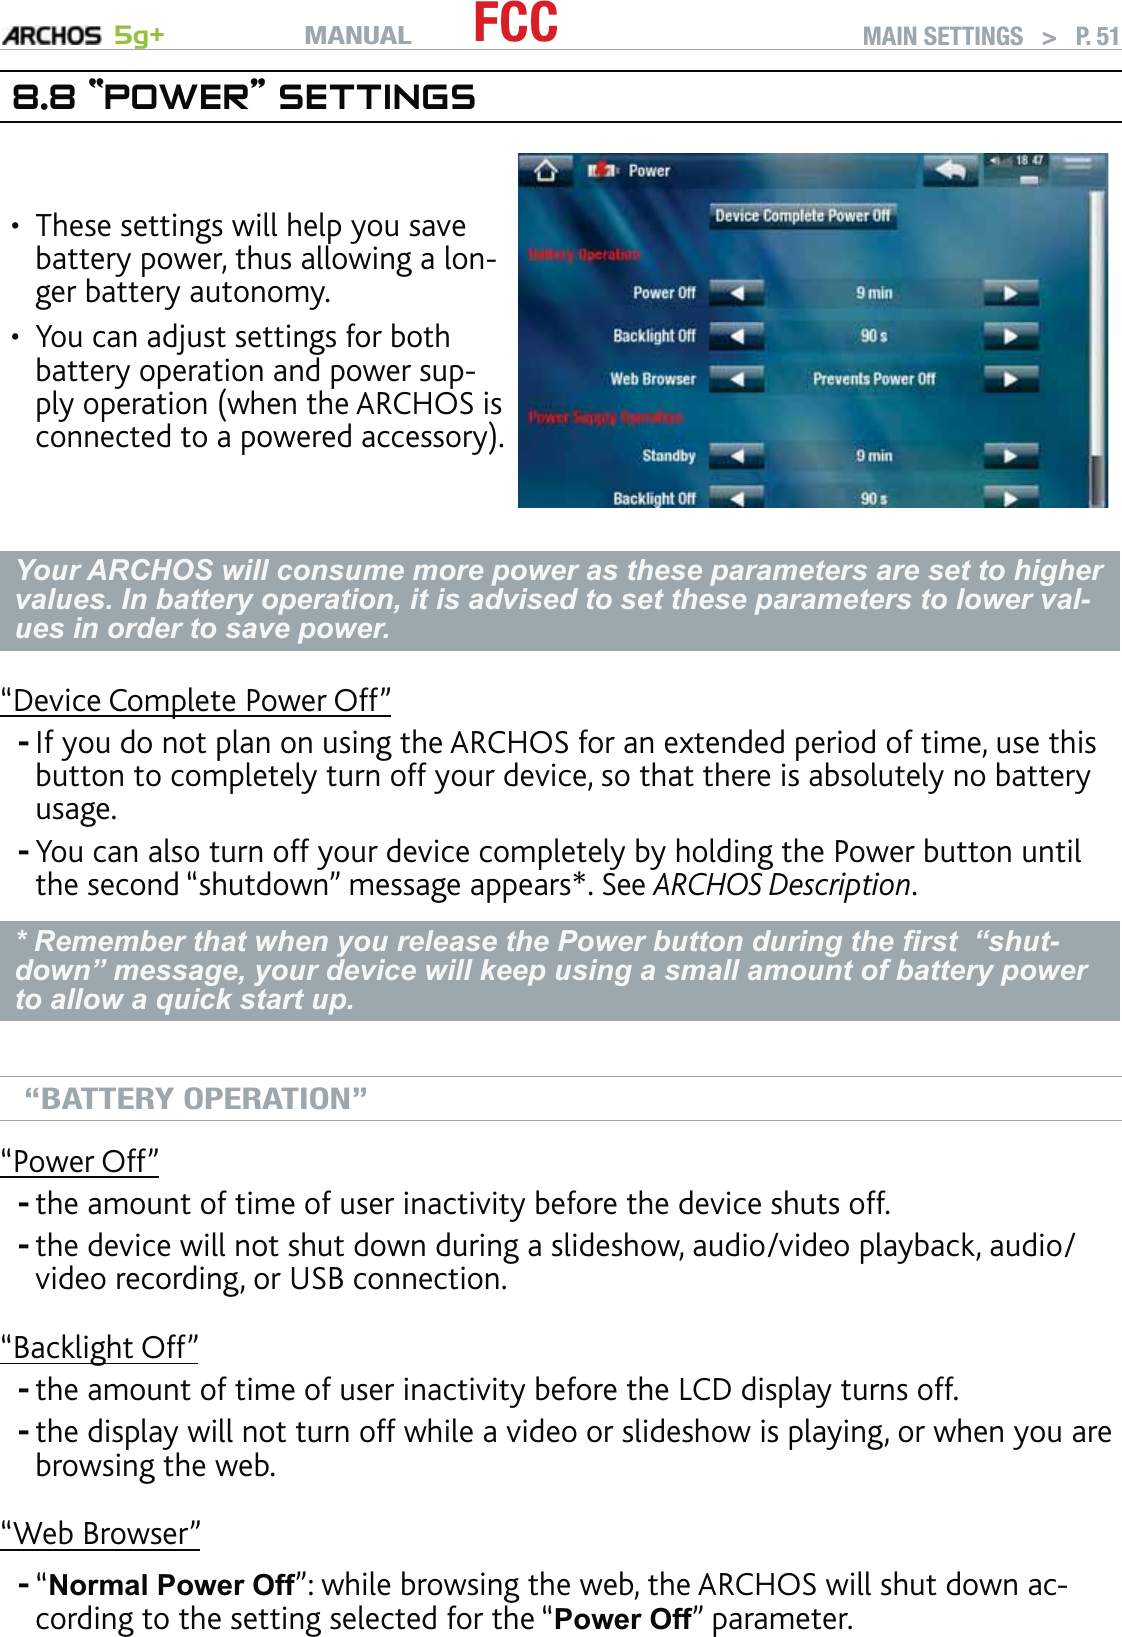 MANUAL 5g+ FCC MAIN SETTINGS   &gt;   P. 518.8 “POWER” SETTINGSThese settings will help you save battery power, thus allowing a lon-ger battery autonomy.You can adjust settings for both battery operation and power sup-ply operation (when the ARCHOS is connected to a powered accessory).••Your ARCHOS will consume more power as these parameters are set to higher values. In battery operation, it is advised to set these parameters to lower val-ues in order to save power.“Device Complete Power Off”If you do not plan on using the ARCHOS for an extended period of time, use this button to completely turn off your device, so that there is absolutely no battery usage. You can also turn off your device completely by holding the Power button until the second “shutdown” message appears*. See ARCHOS Description.* Remember that when you release the Power button during the ﬁrst  “shut-down” message, your device will keep using a small amount of battery power to allow a quick start up. “BATTERY OPERATION”“Power Off”the amount of time of user inactivity before the device shuts off.the device will not shut down during a slideshow, audio/video playback, audio/video recording, or USB connection.“Backlight Off”the amount of time of user inactivity before the LCD display turns off.the display will not turn off while a video or slideshow is playing, or when you are browsing the web.“Web Browser”“Normal Power Off”: while browsing the web, the ARCHOS will shut down ac-cording to the setting selected for the “Power Off” parameter.-------